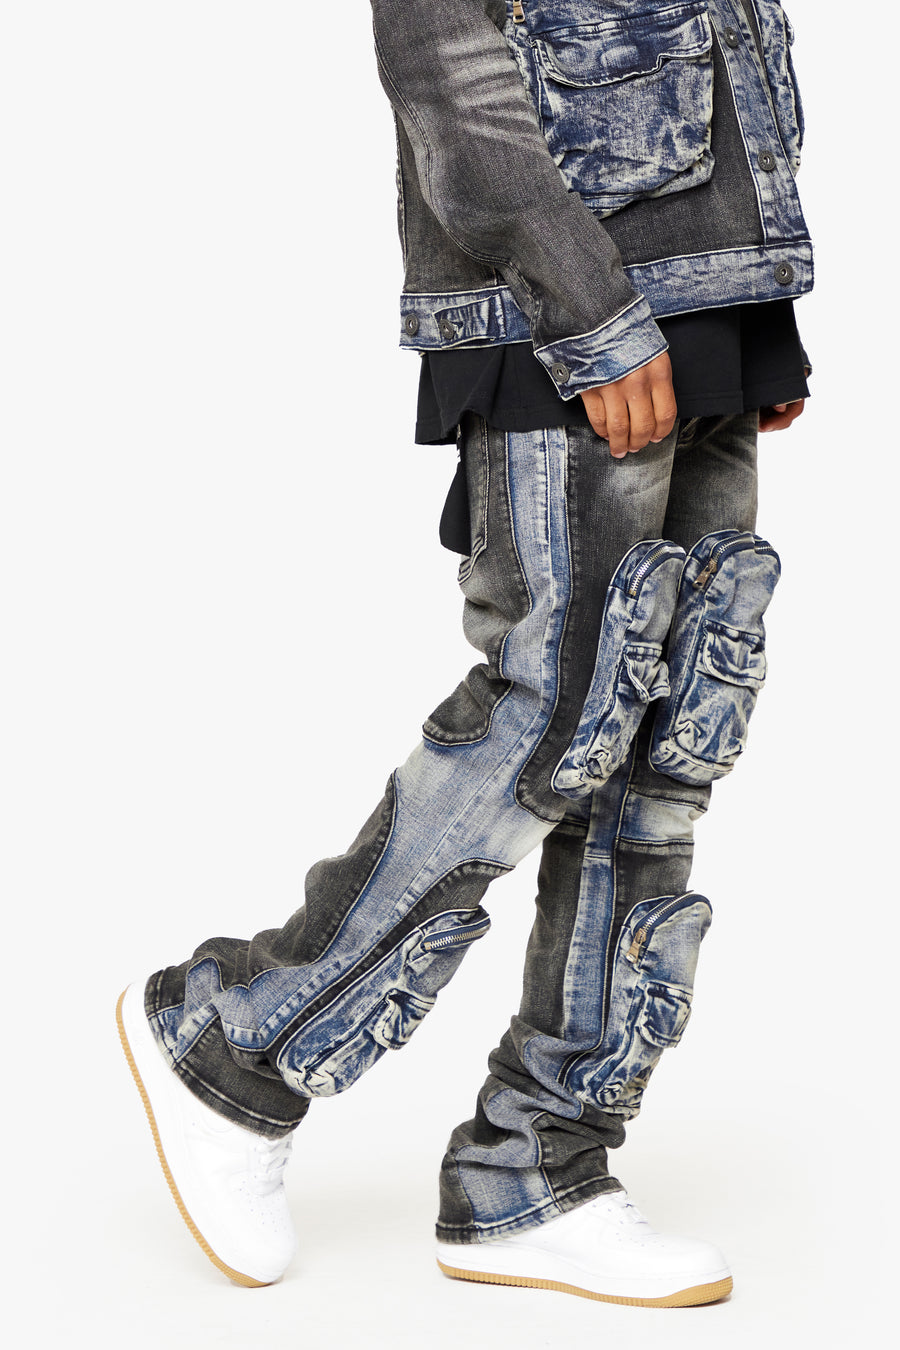 "DUAL SOLDIER" BLACK BLUE STACKED FLARE JEAN